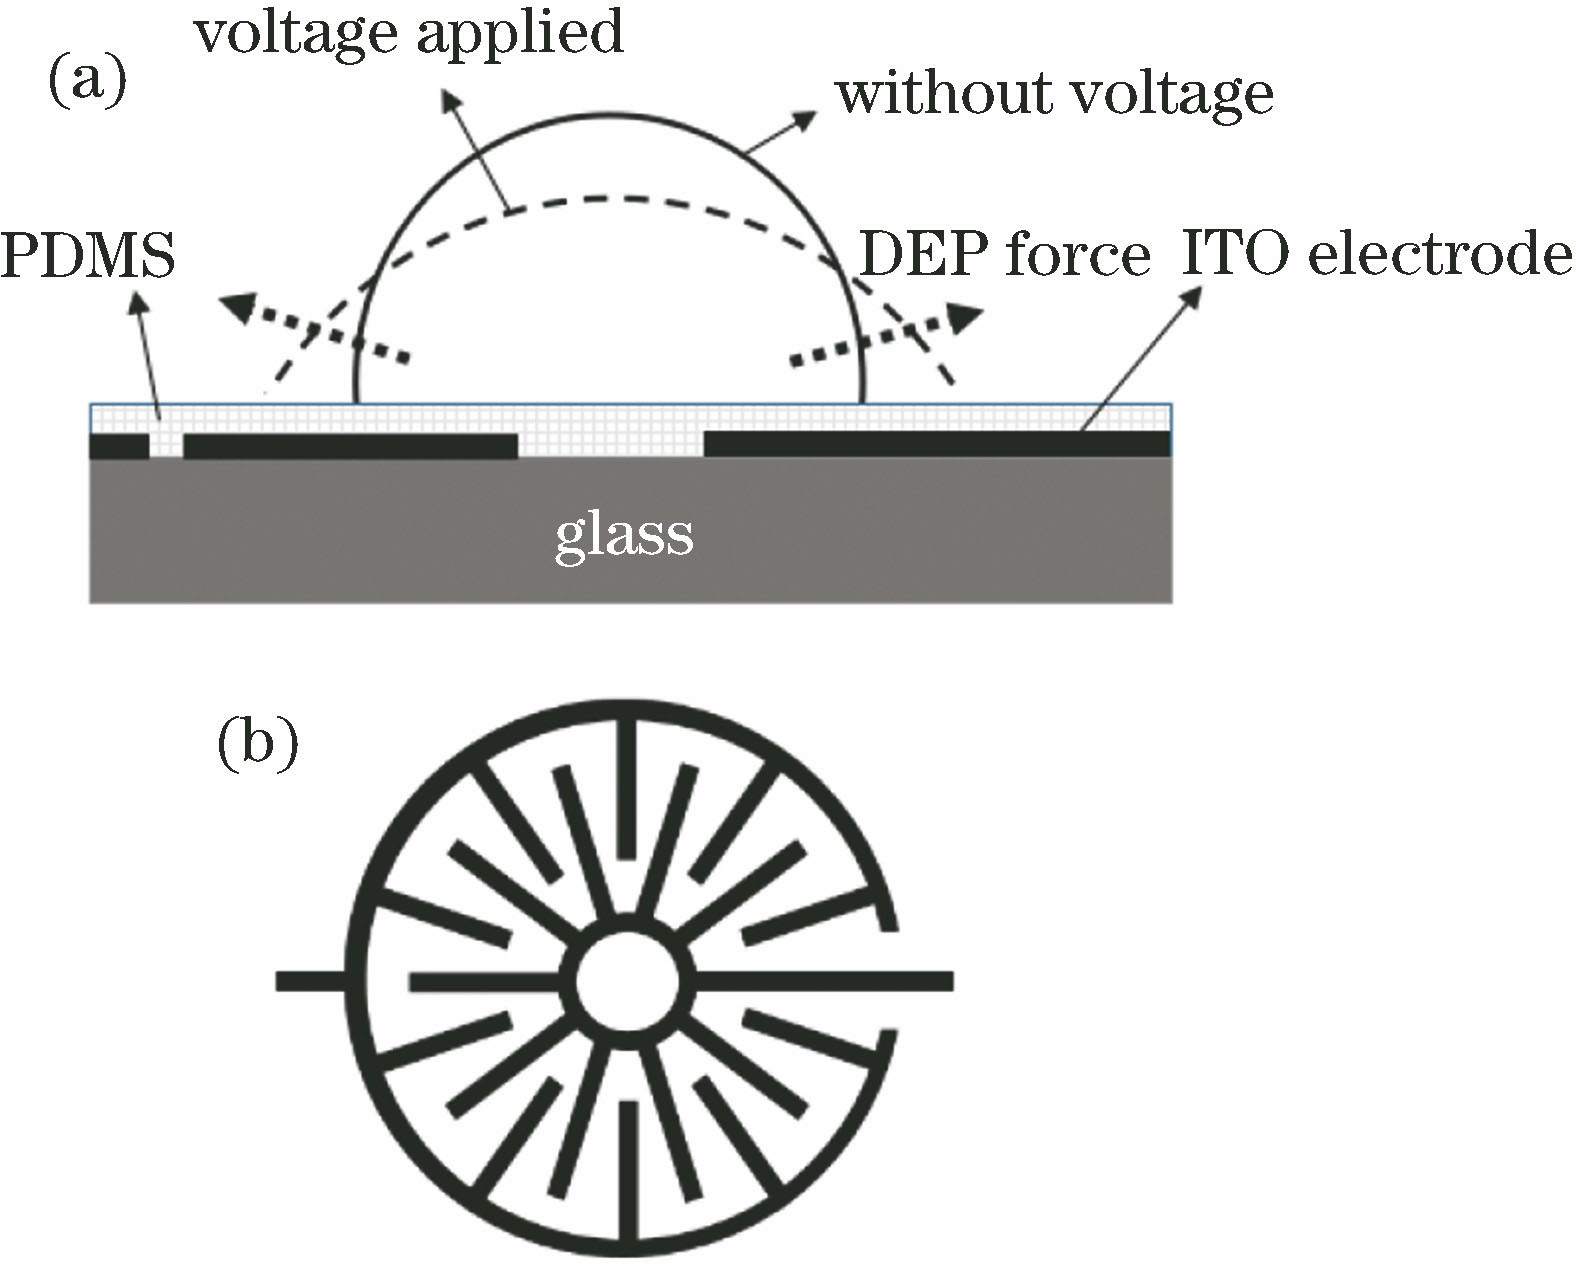 Structural diagram of dielectric liquid lens. (a) Diagram of droplet deformation principle of dielectric lens; (b) ITO electrode pattern